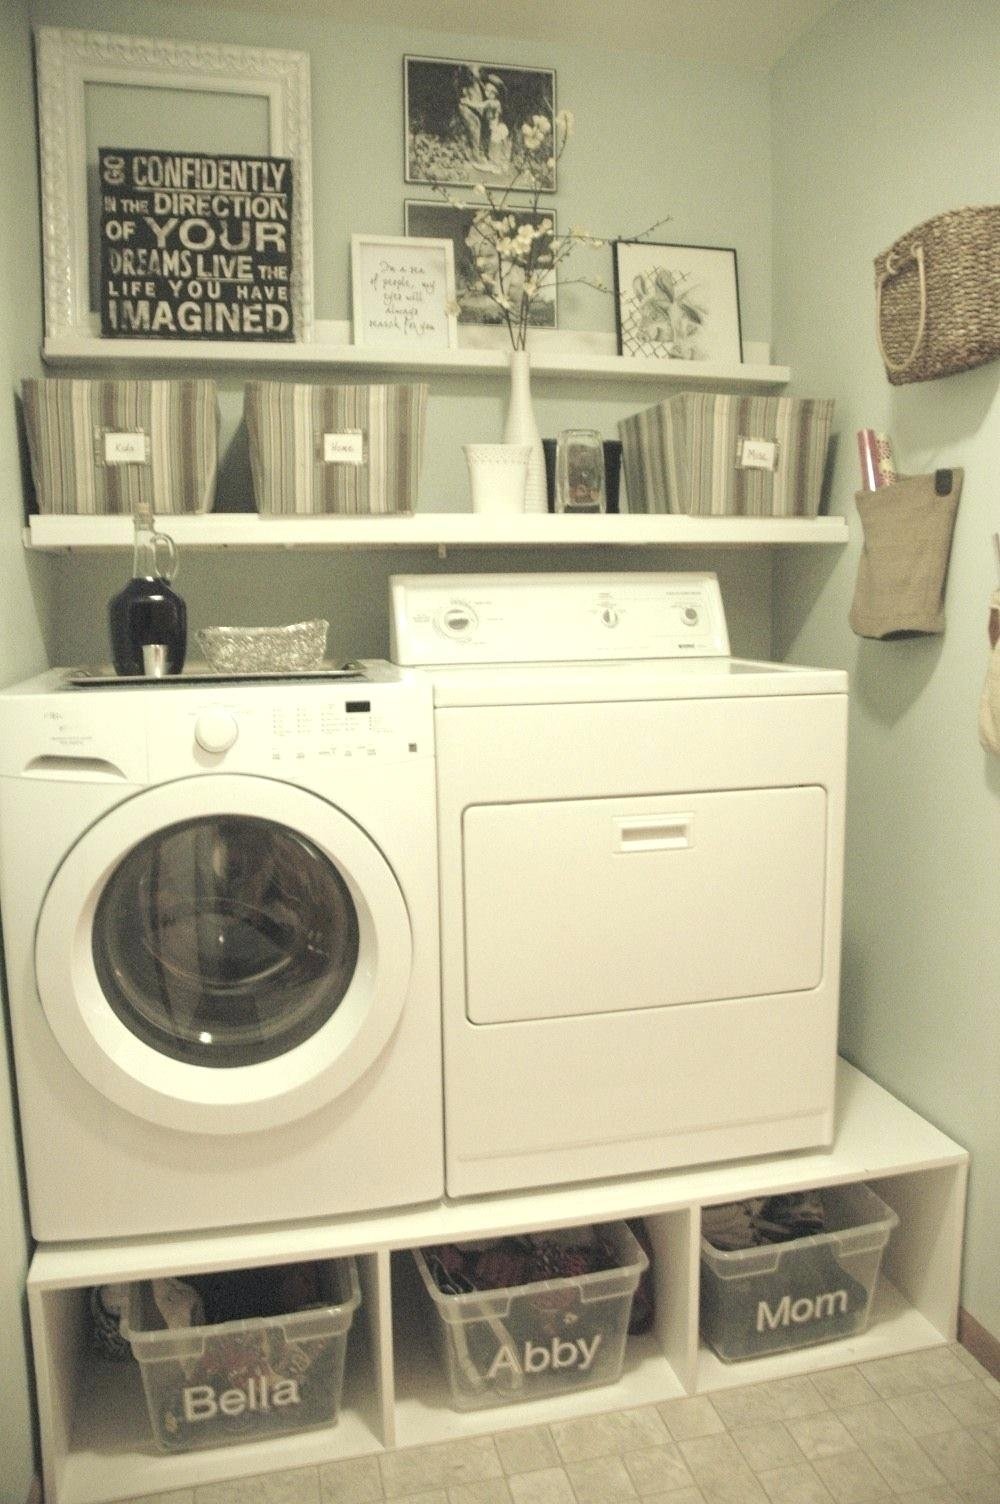 10 Most Popular Small Laundry Room Ideas Pinterest small laundry room ideas pictures with top loading washer pinterest 2022